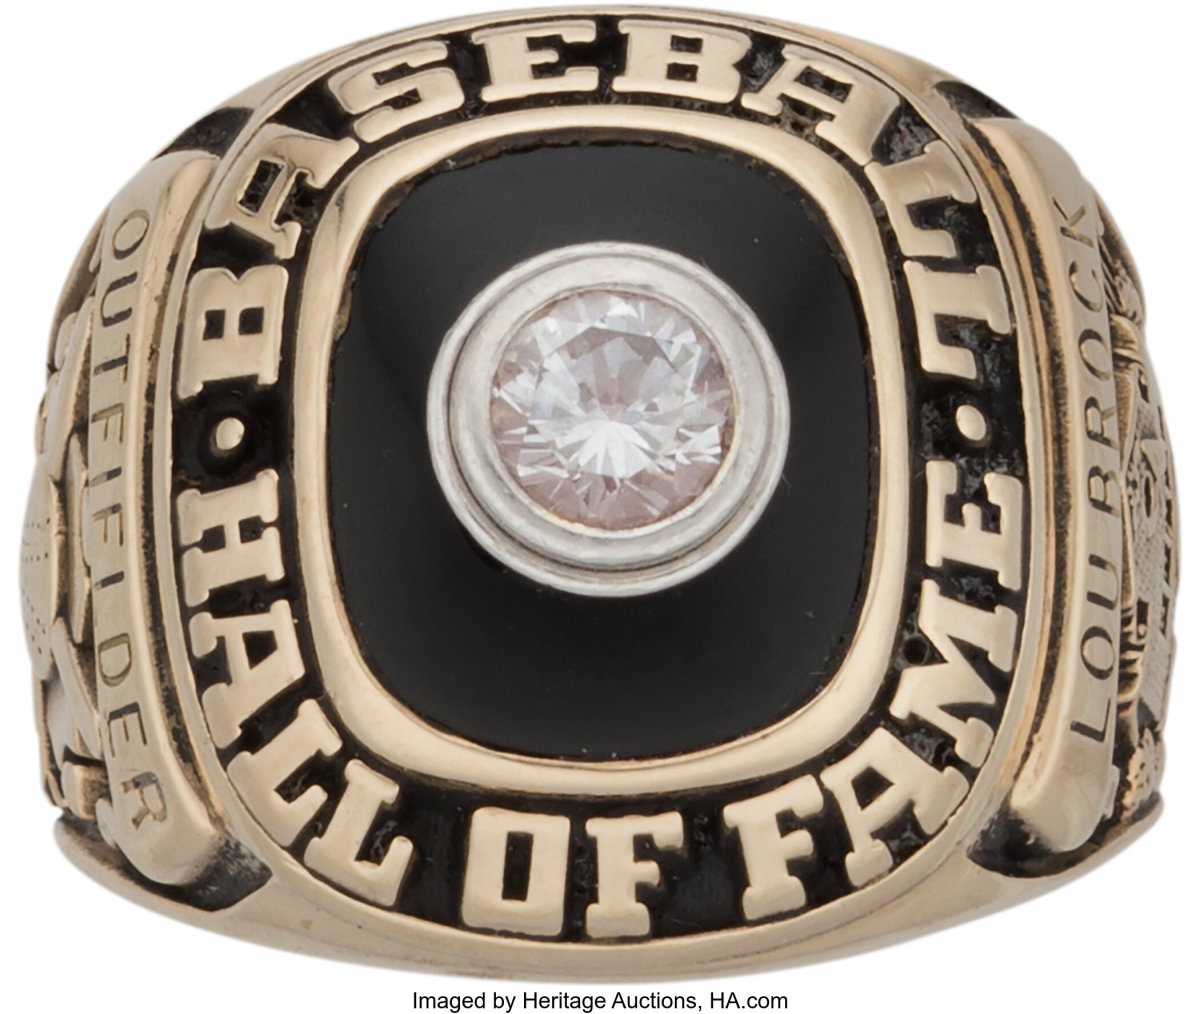 Lou Brock's Hall of Fame ring from the Lou Brock Collection.